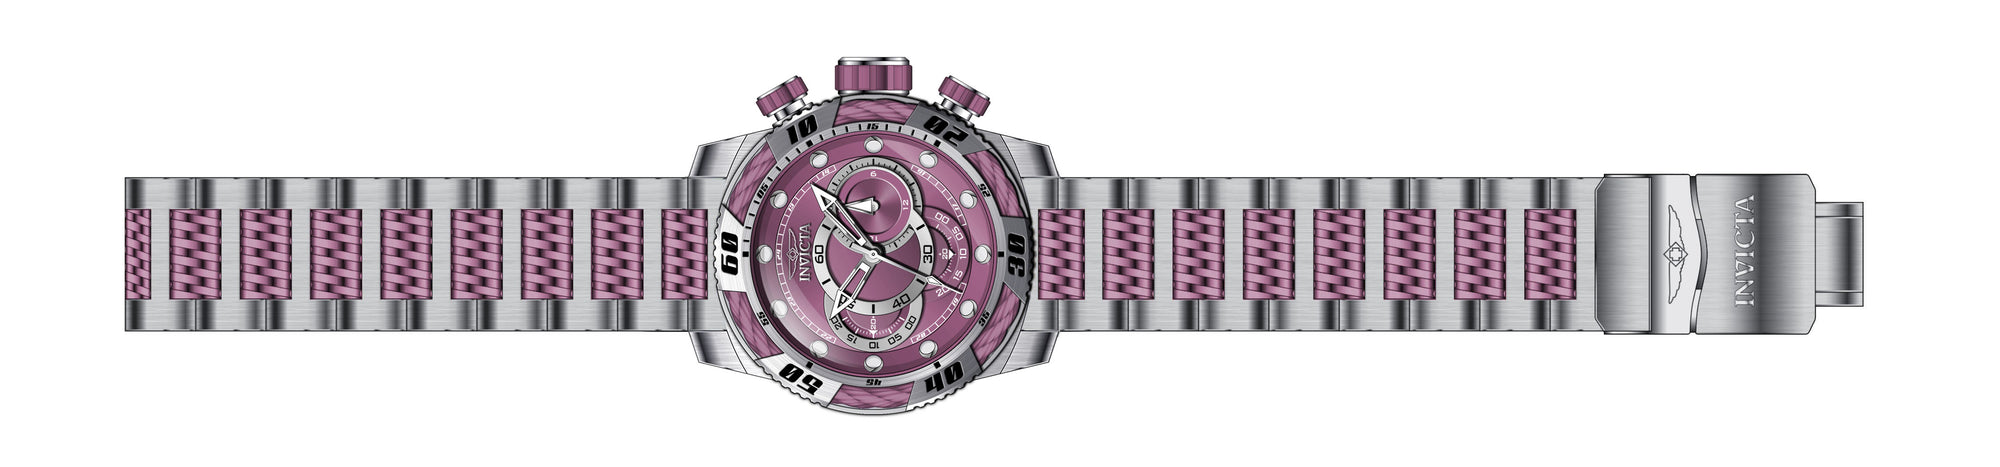 Band for Invicta Speedway Men 40779